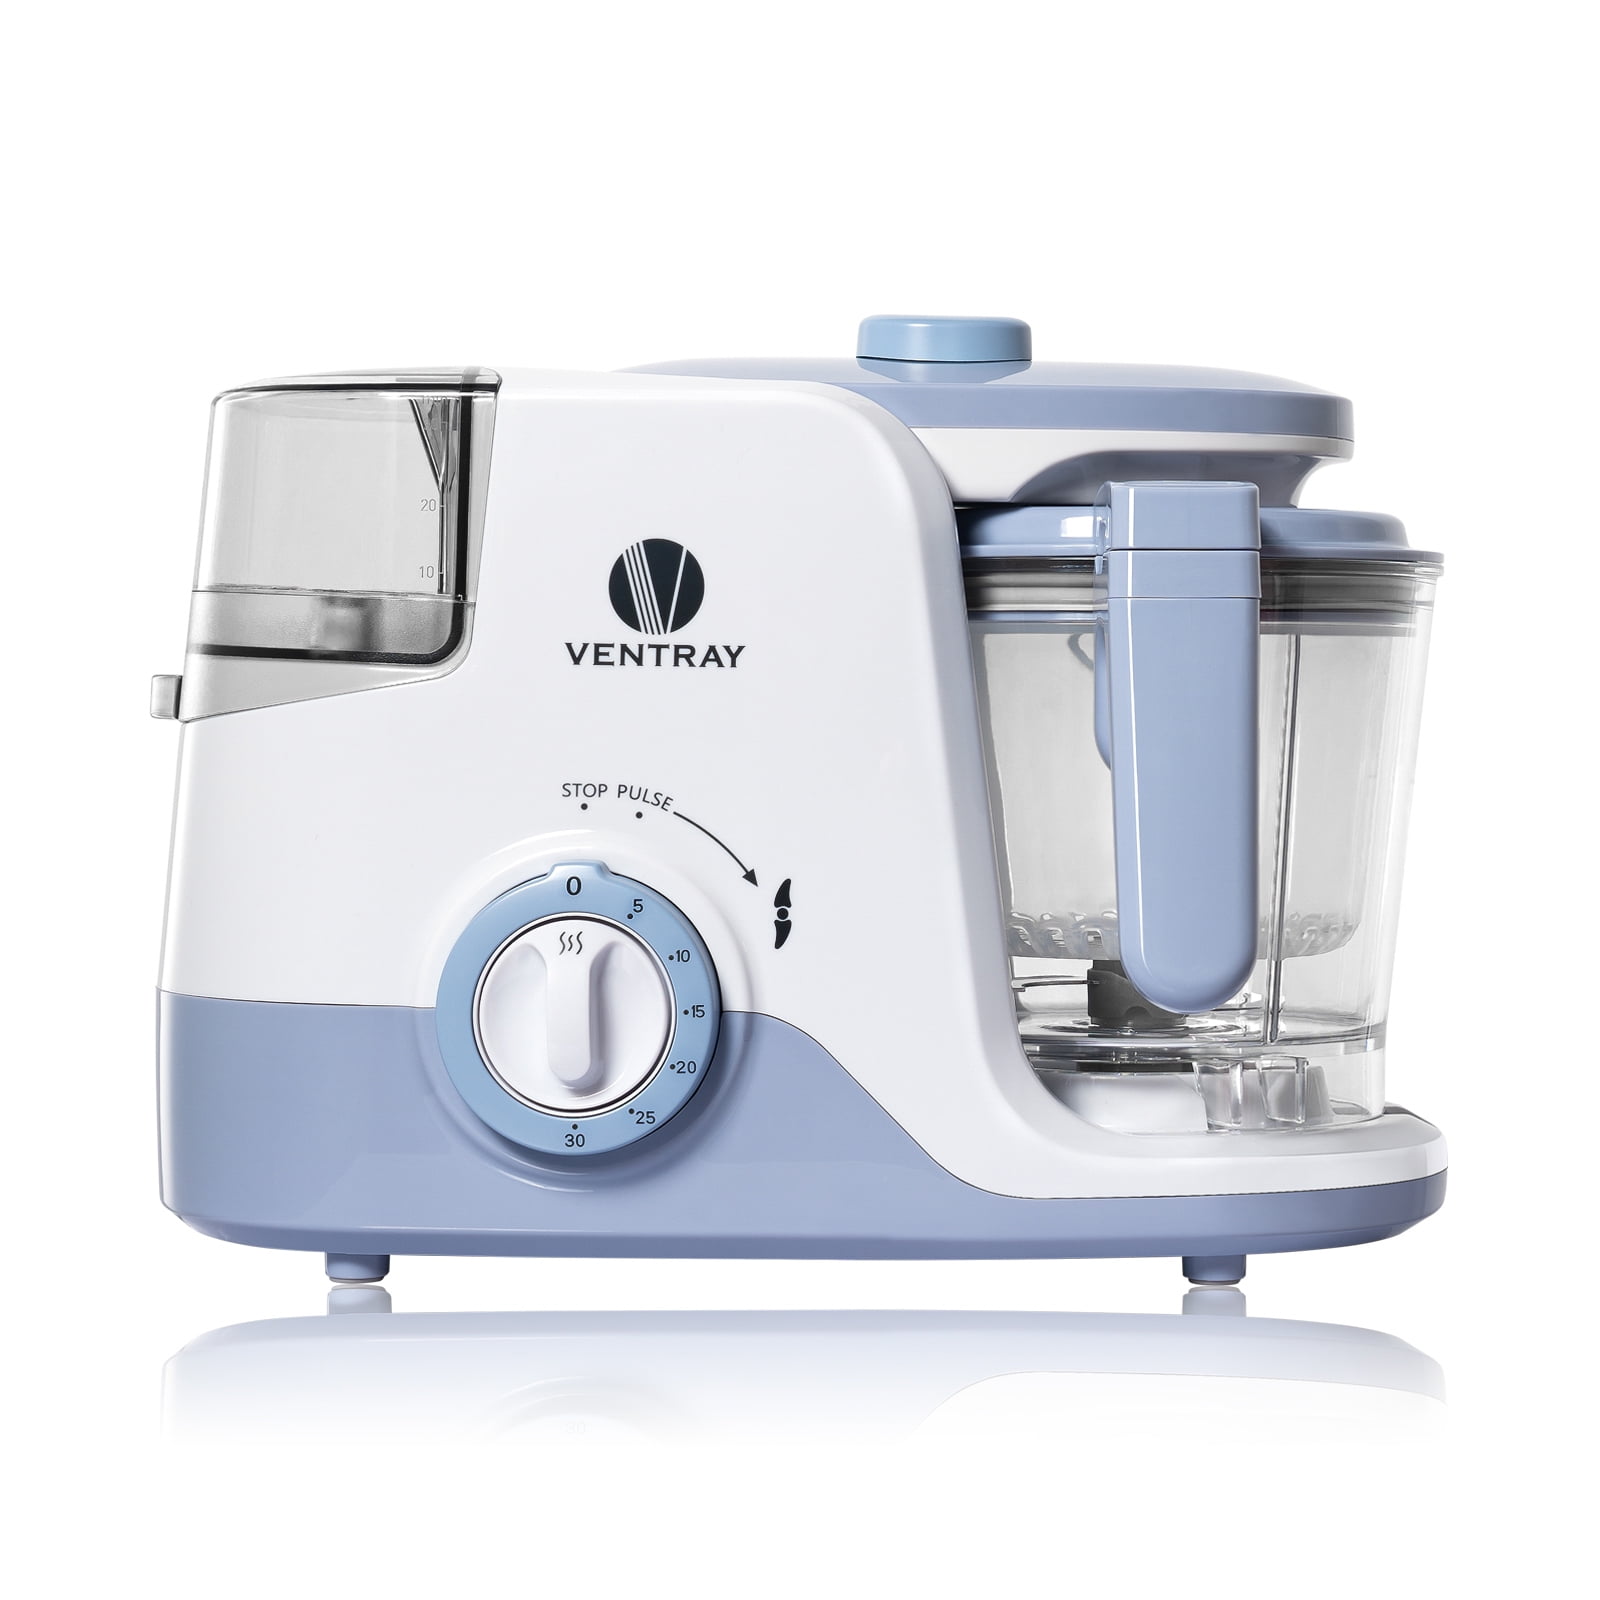 POUCH'EAT - Conditioning Station and Baby Food Maker – 👶 Serene